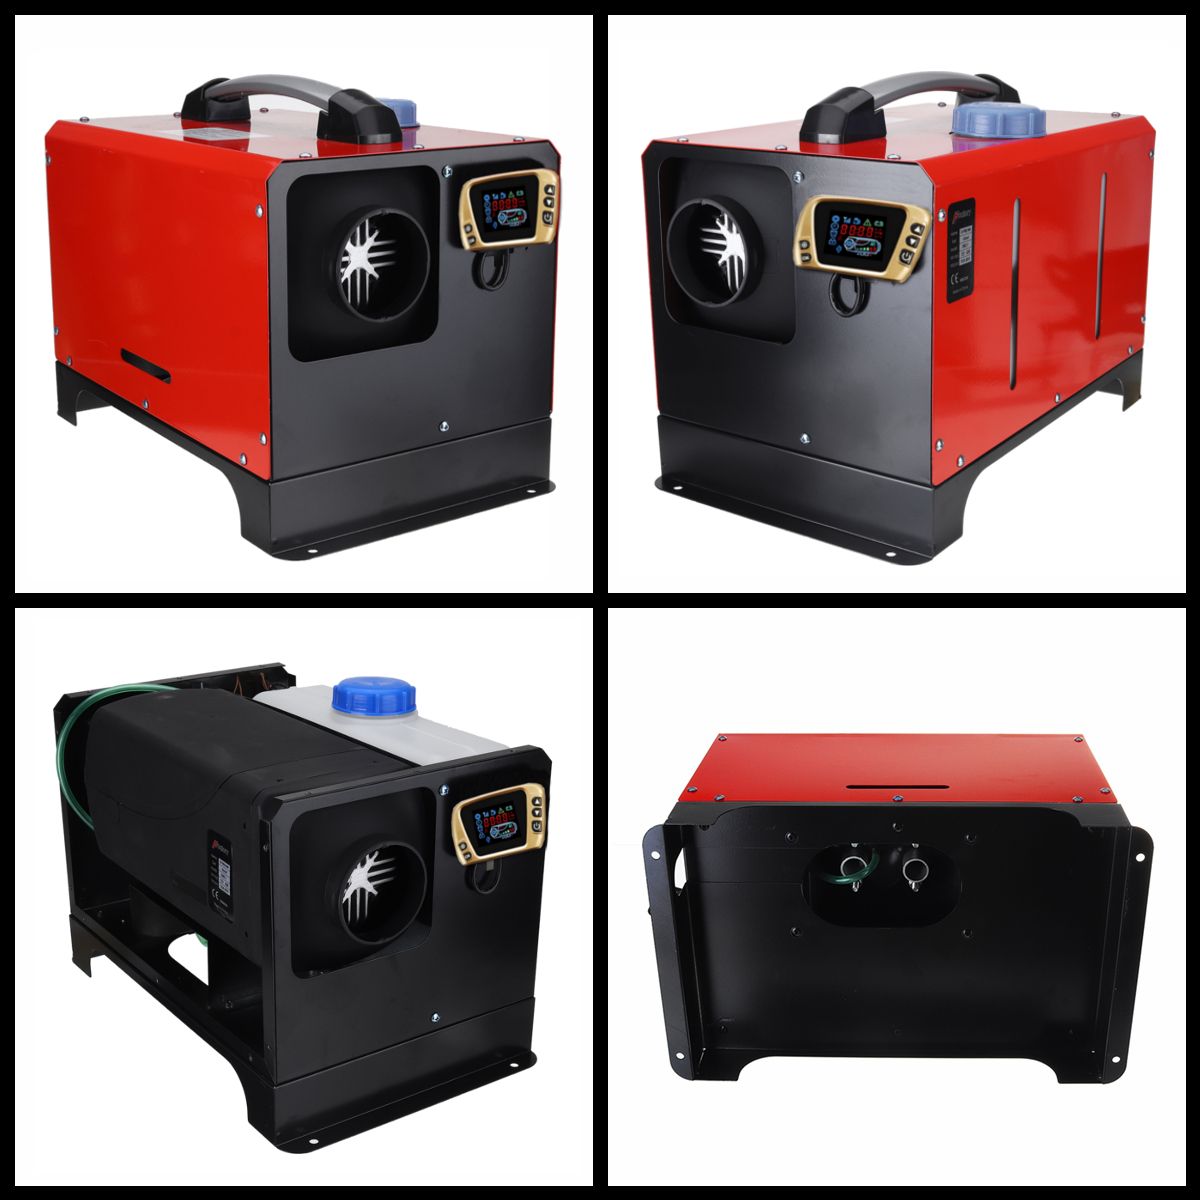 All-in-One-Unit-8KW-12V-Car-Heating-Tool-Diesel-Air-Heater-Single-Hole-Gold-LCD-Monitor-Parking-Warm-1612208